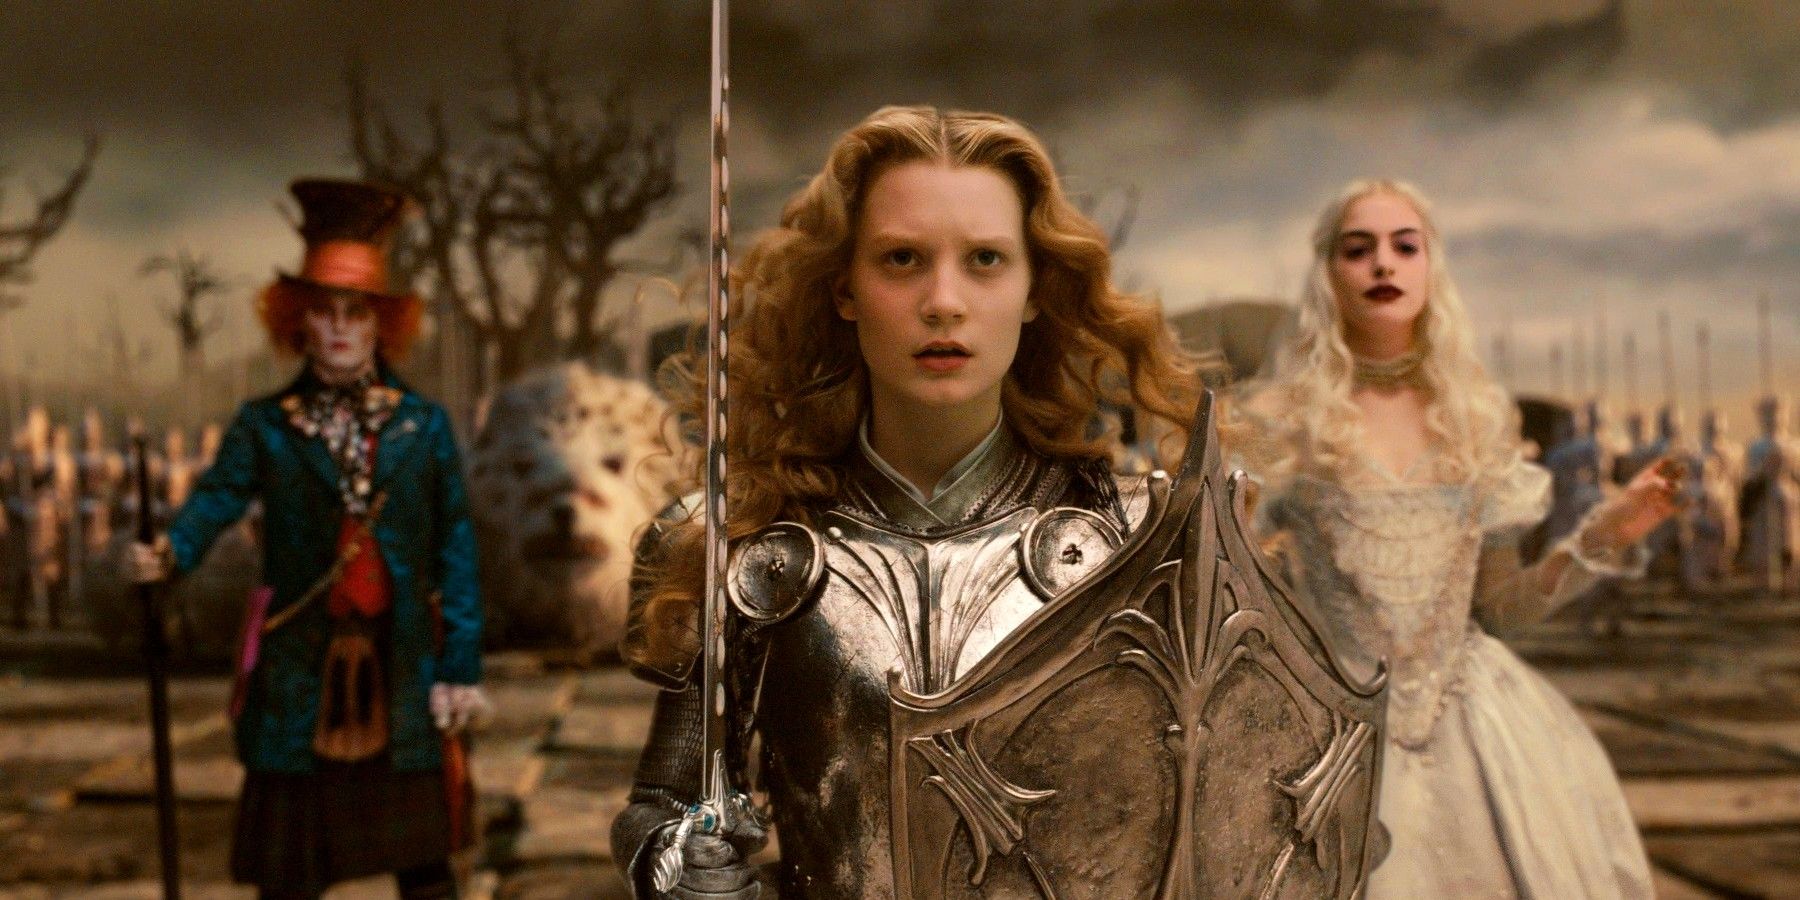 Alice in Wonderland, directed by Tim Burton, is even more epic than the original movie.